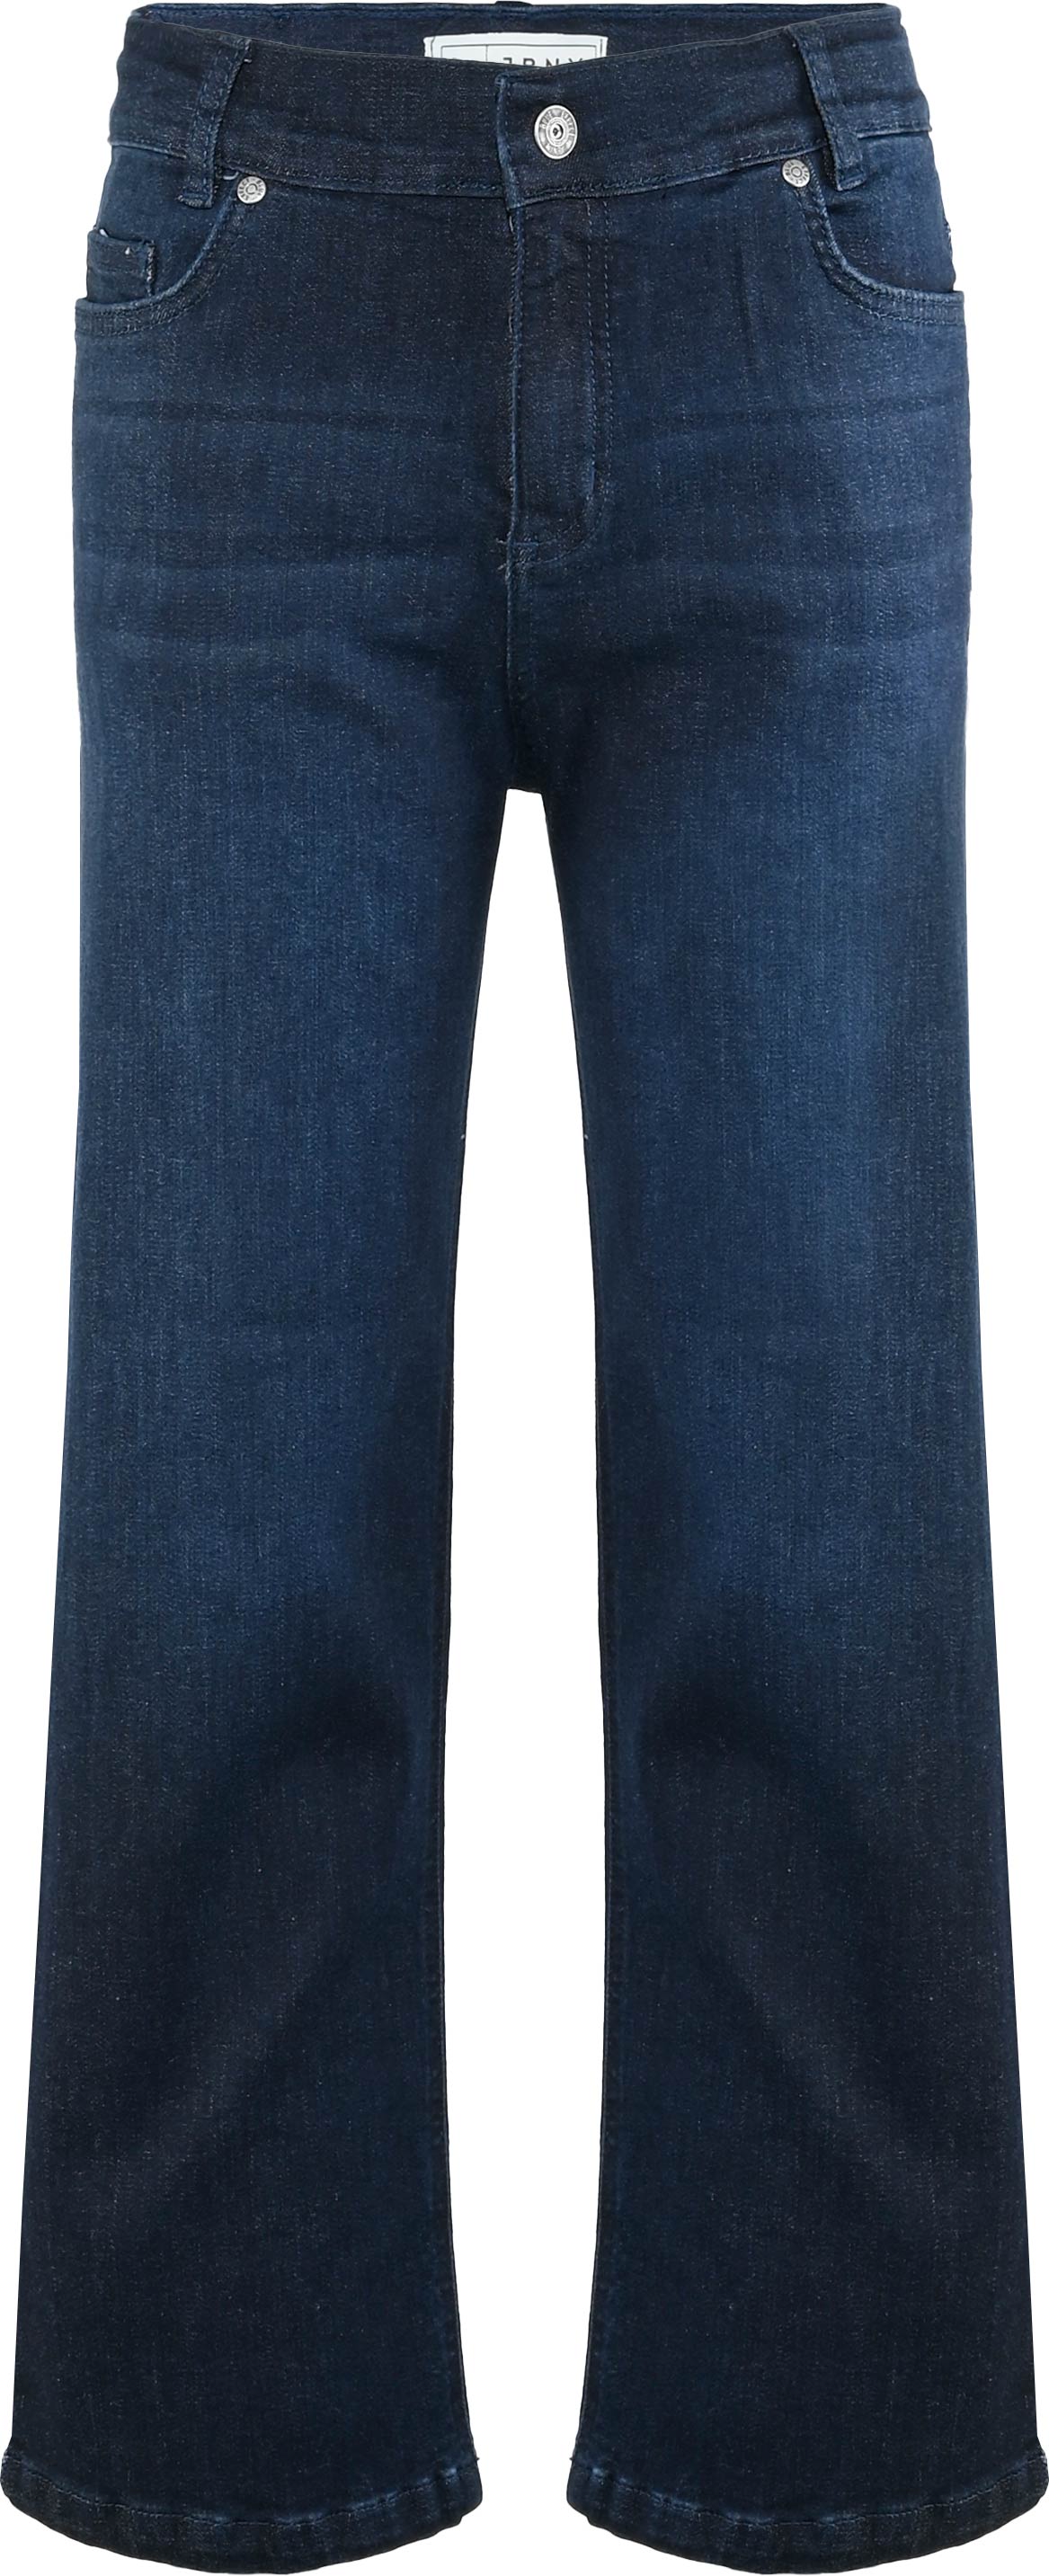 1401-JRNY Wide Leg Jeans Girls, Straight Cut, available in Normal